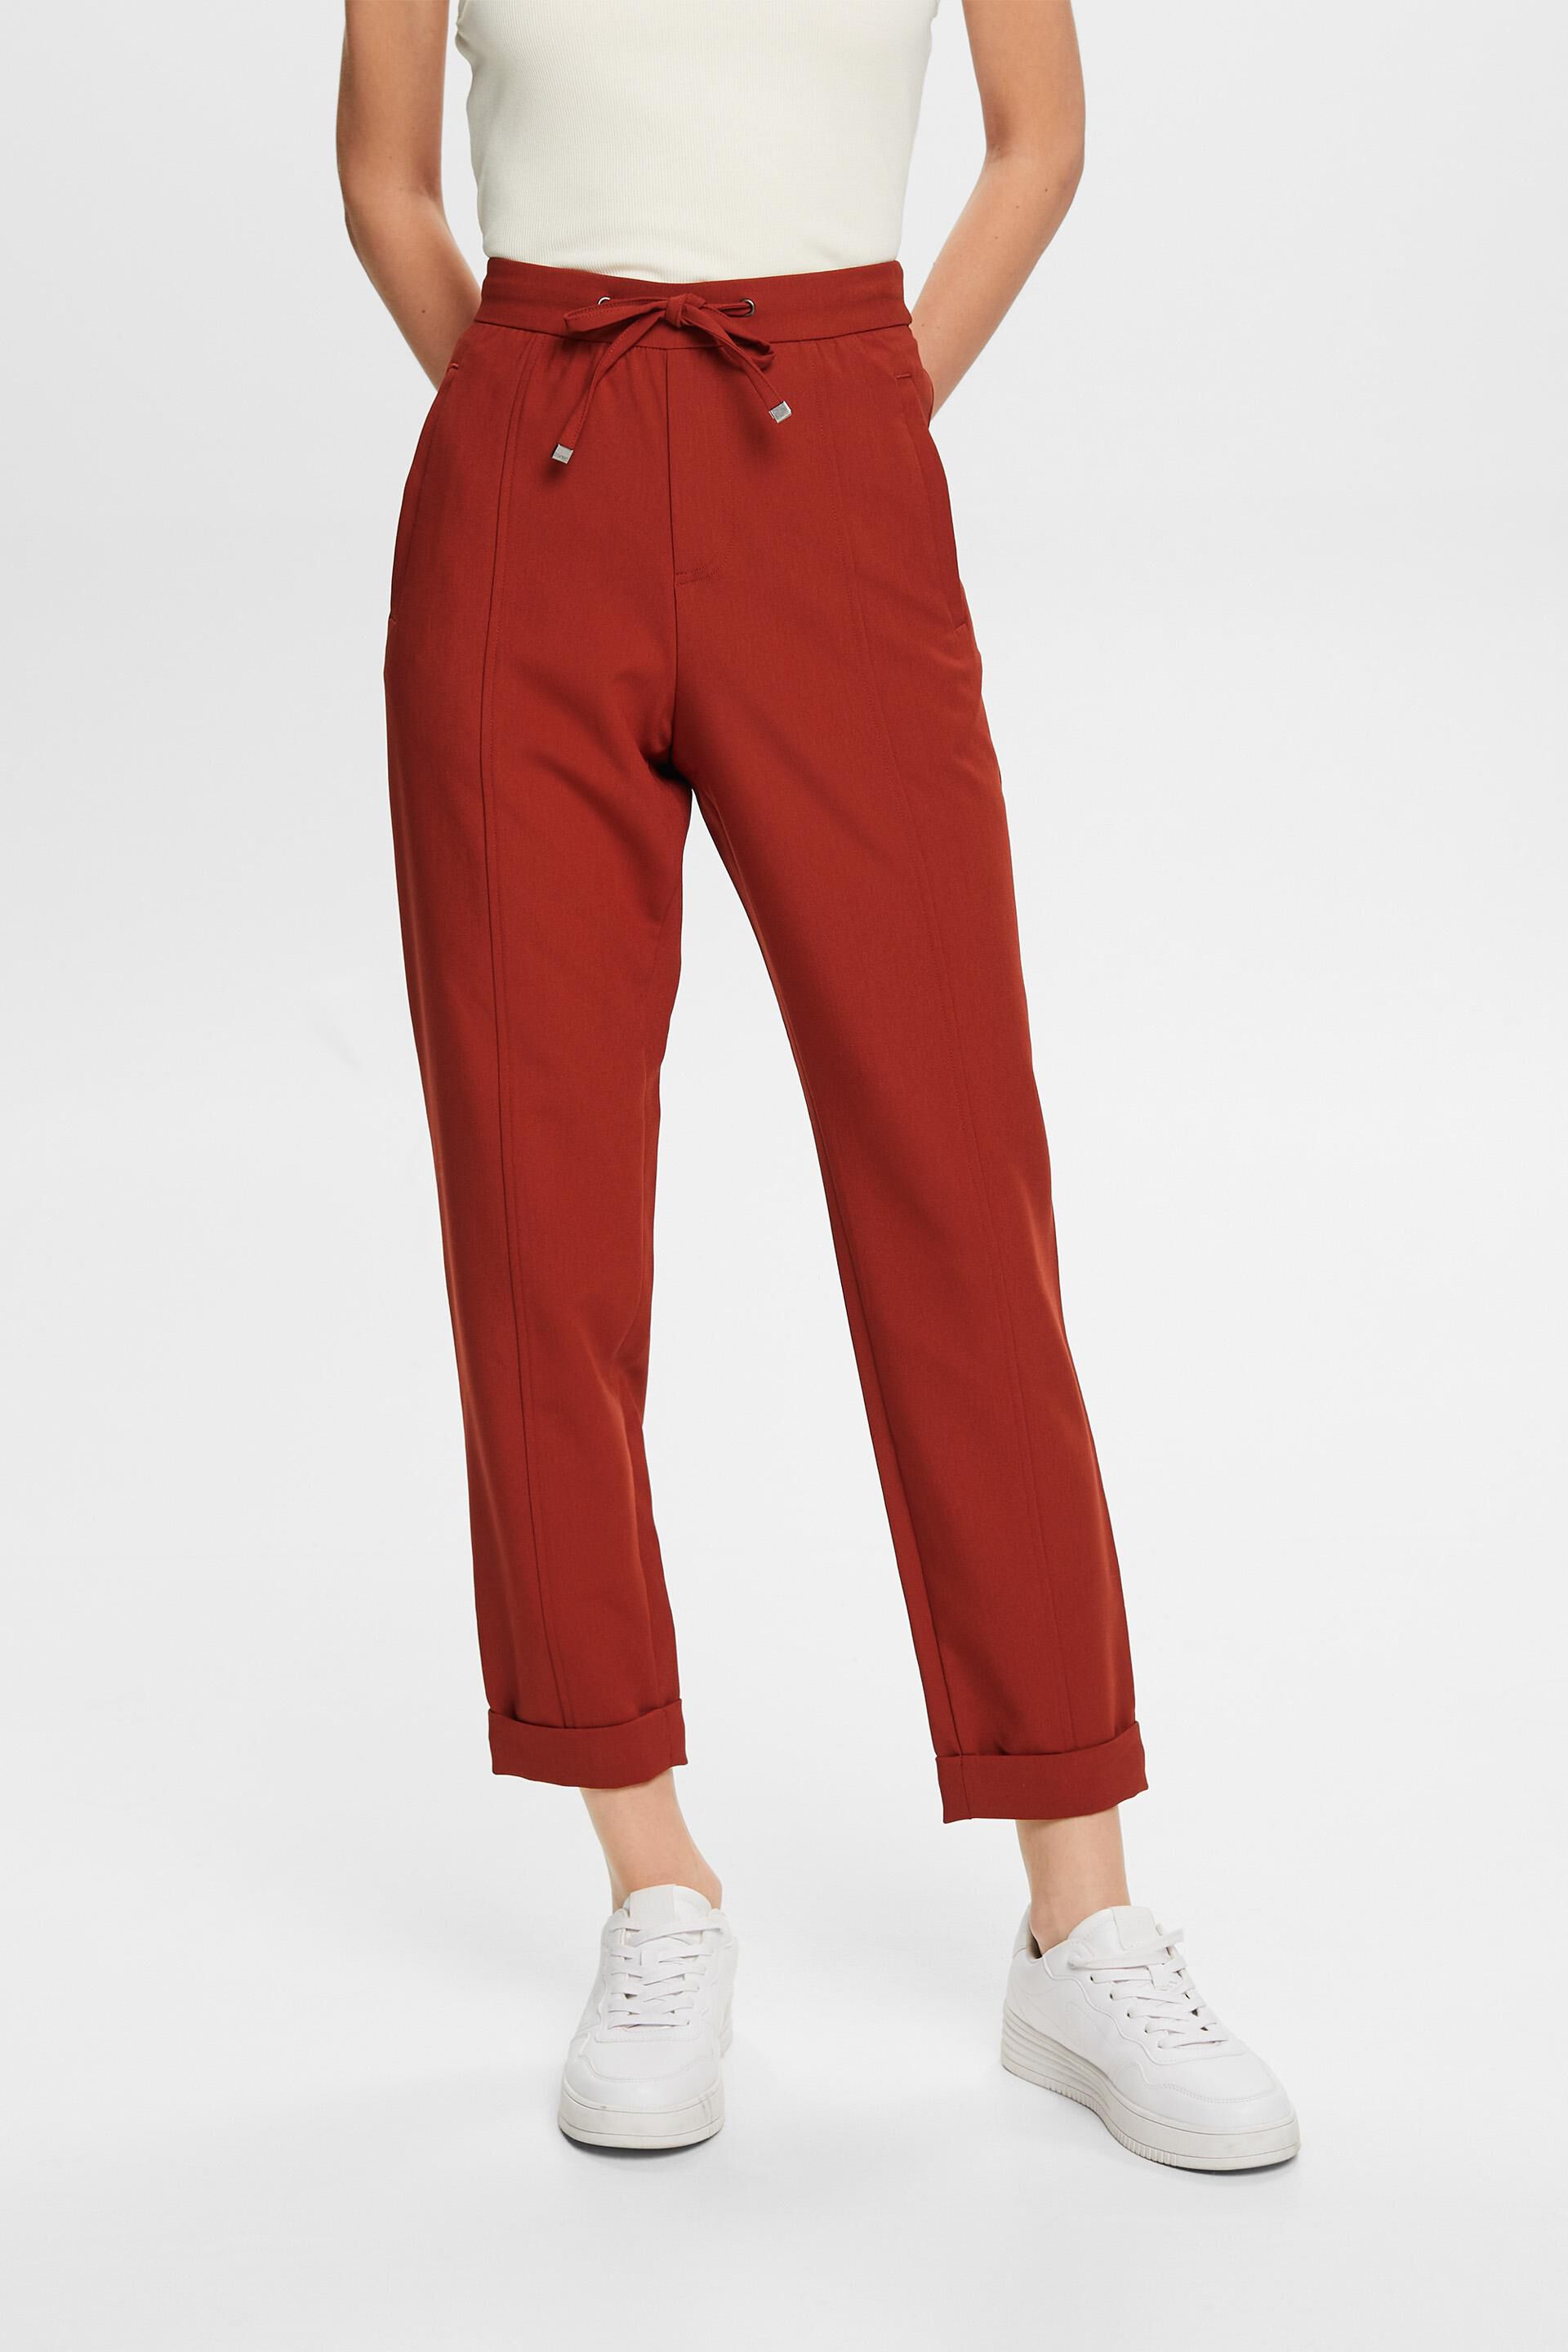 Esprit Mid-rise jogger trousers style